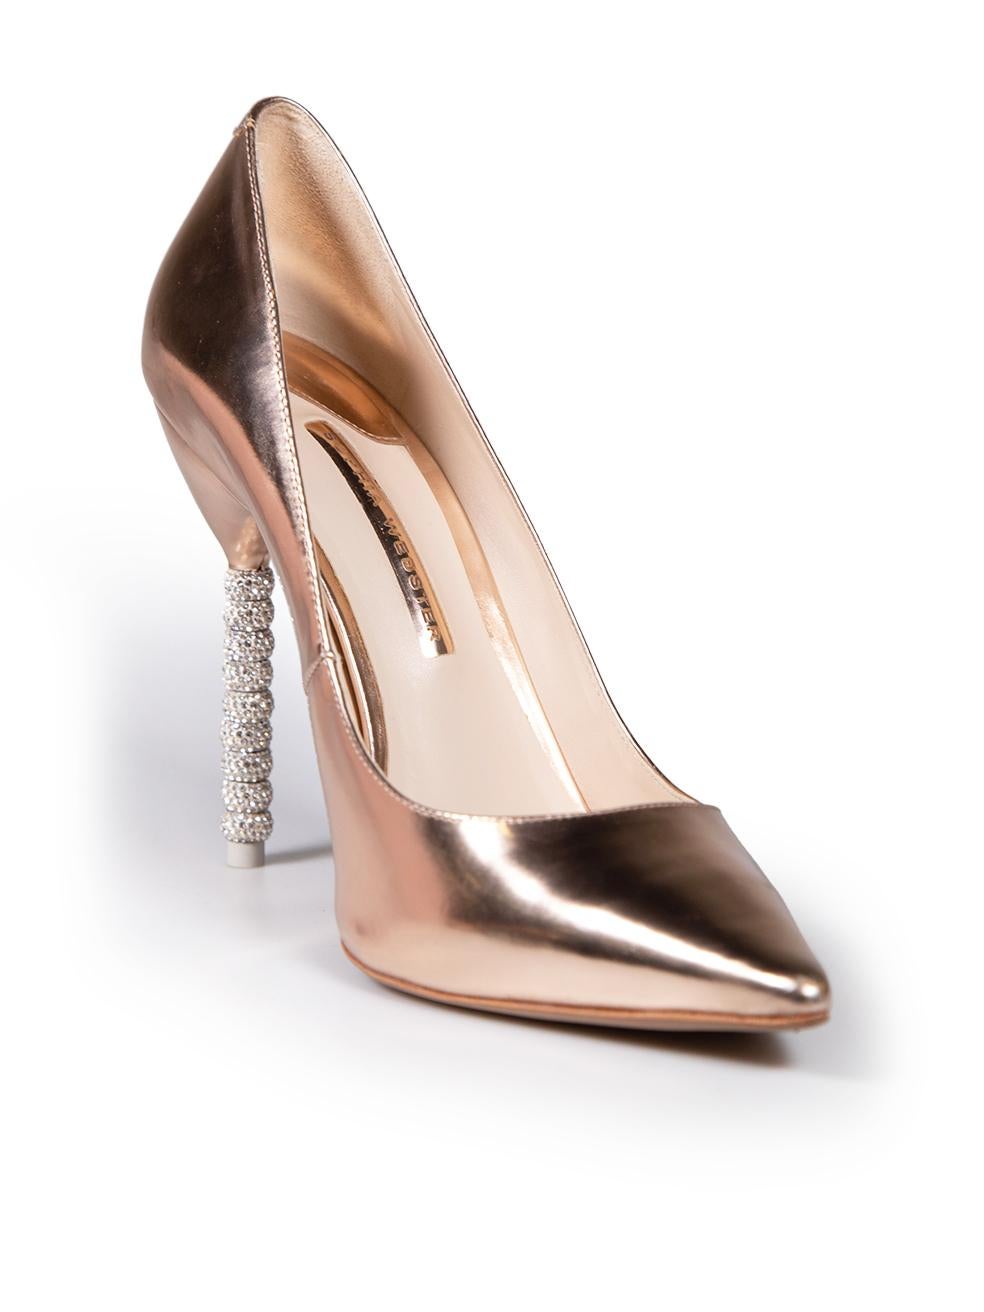 CONDITION is Very good. Minimal wear to pumps is evident. Minimal scratches and abrasion to leather of top and rear of both shoes on this used Sophia Webster designer resale item. This item comes with original box.
 
 
 
 Details
 
 
 Rose gold
 
